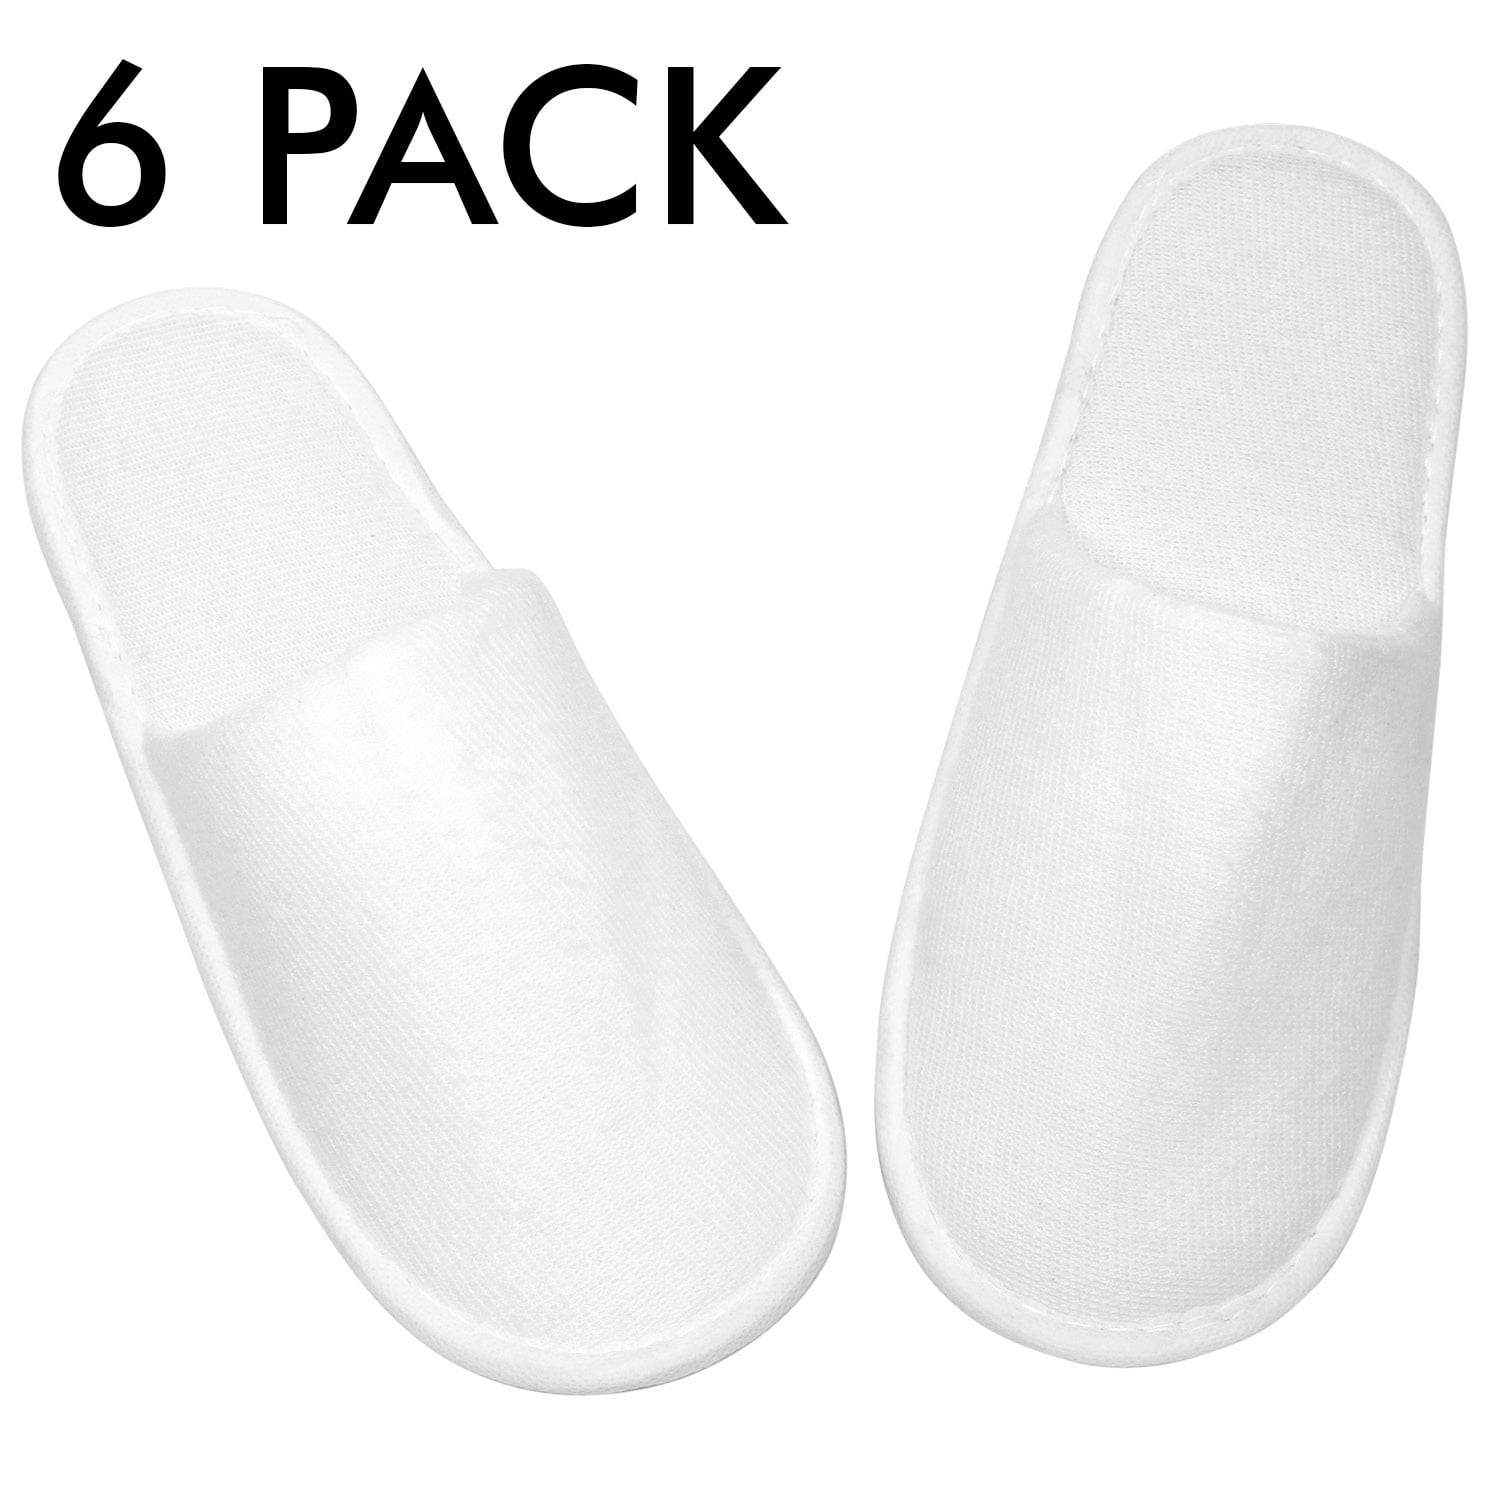 Washable and Non-Disposable Party Guest Echoapple Two Size Fit Most Winter Slippers Easily Foldable and Portable Hotel and Travel Deluxe Closed Toe Slippers for Spa